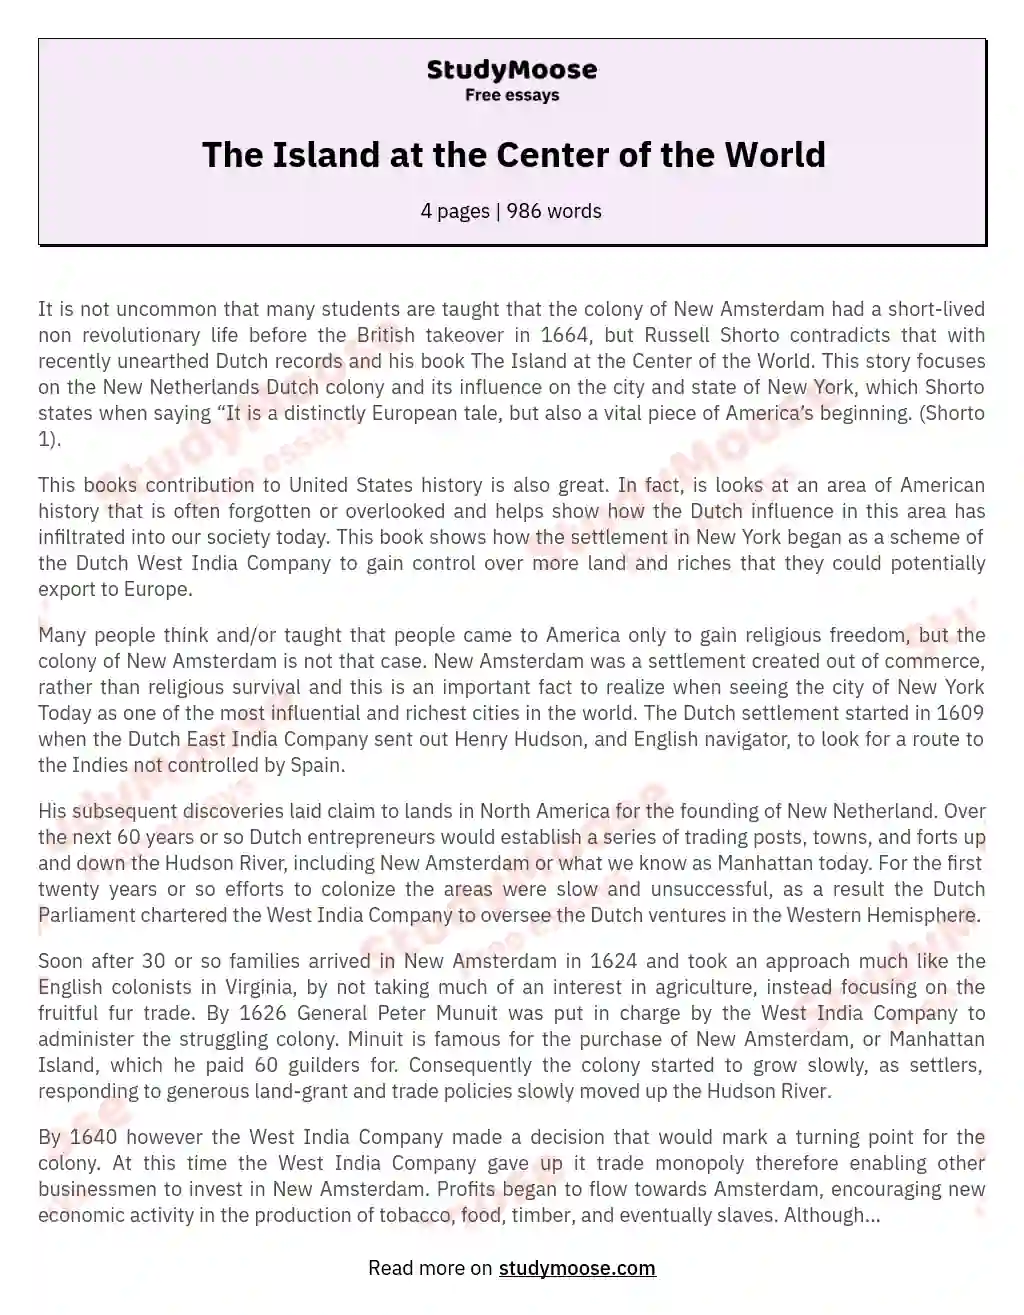 The Island at the Center of the World essay